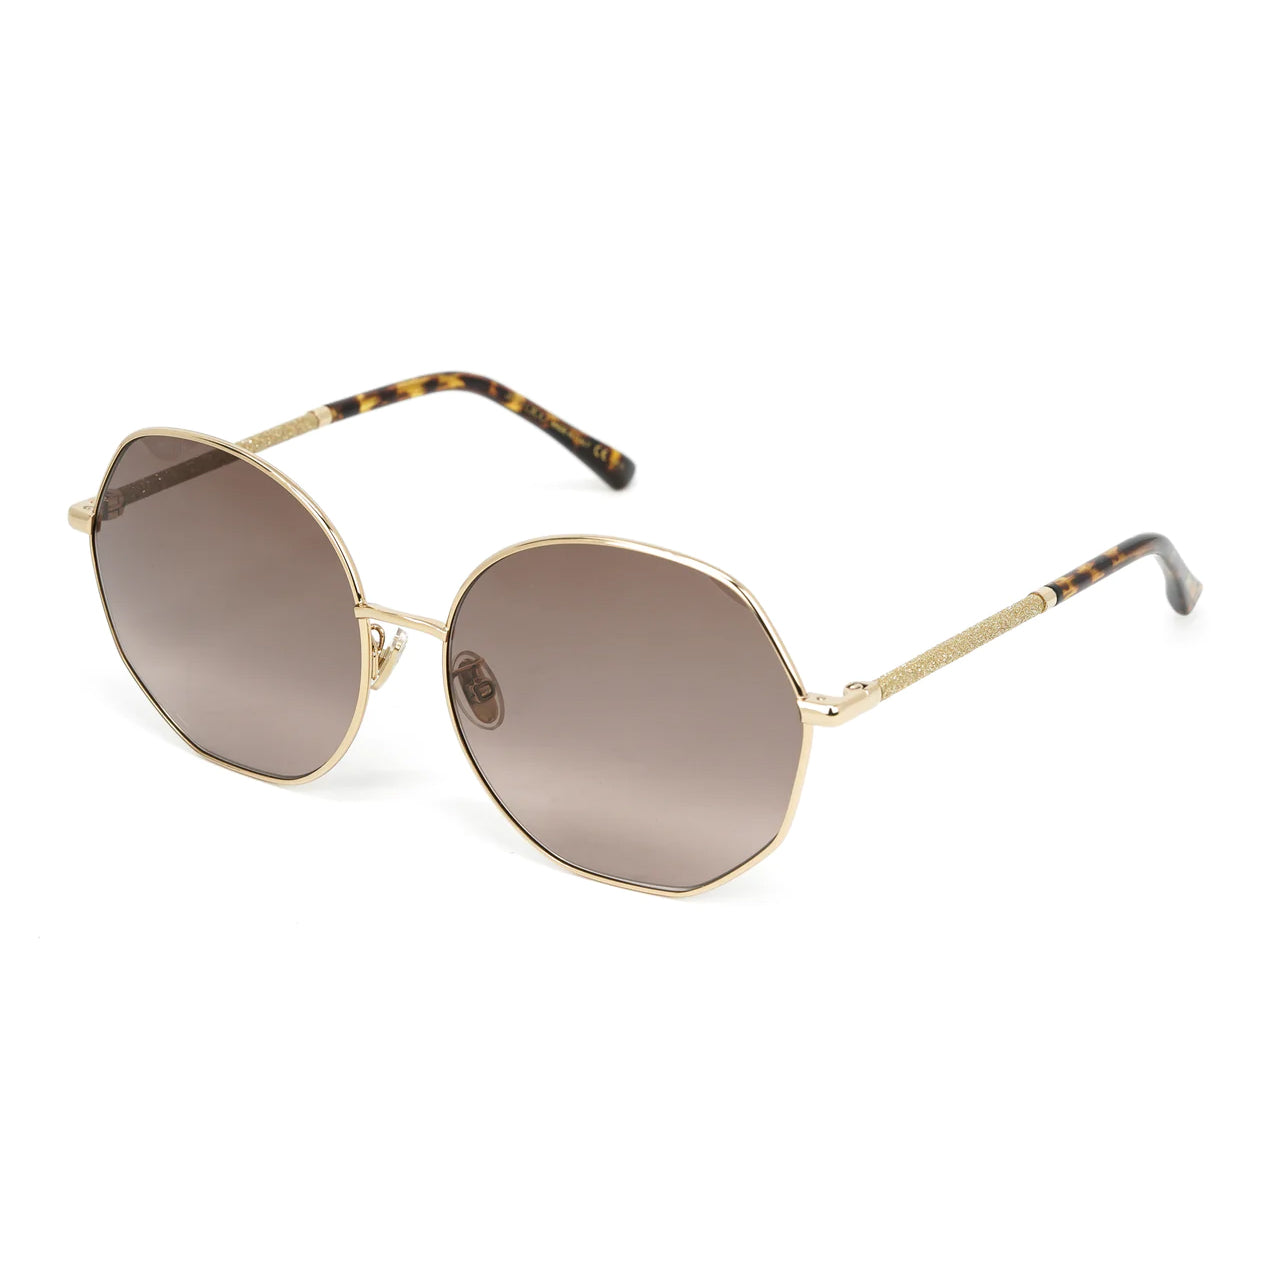 Jimmy Choo Women's Sunglasses Oversized Round Gold/Brown CORAL/G/SK 06J